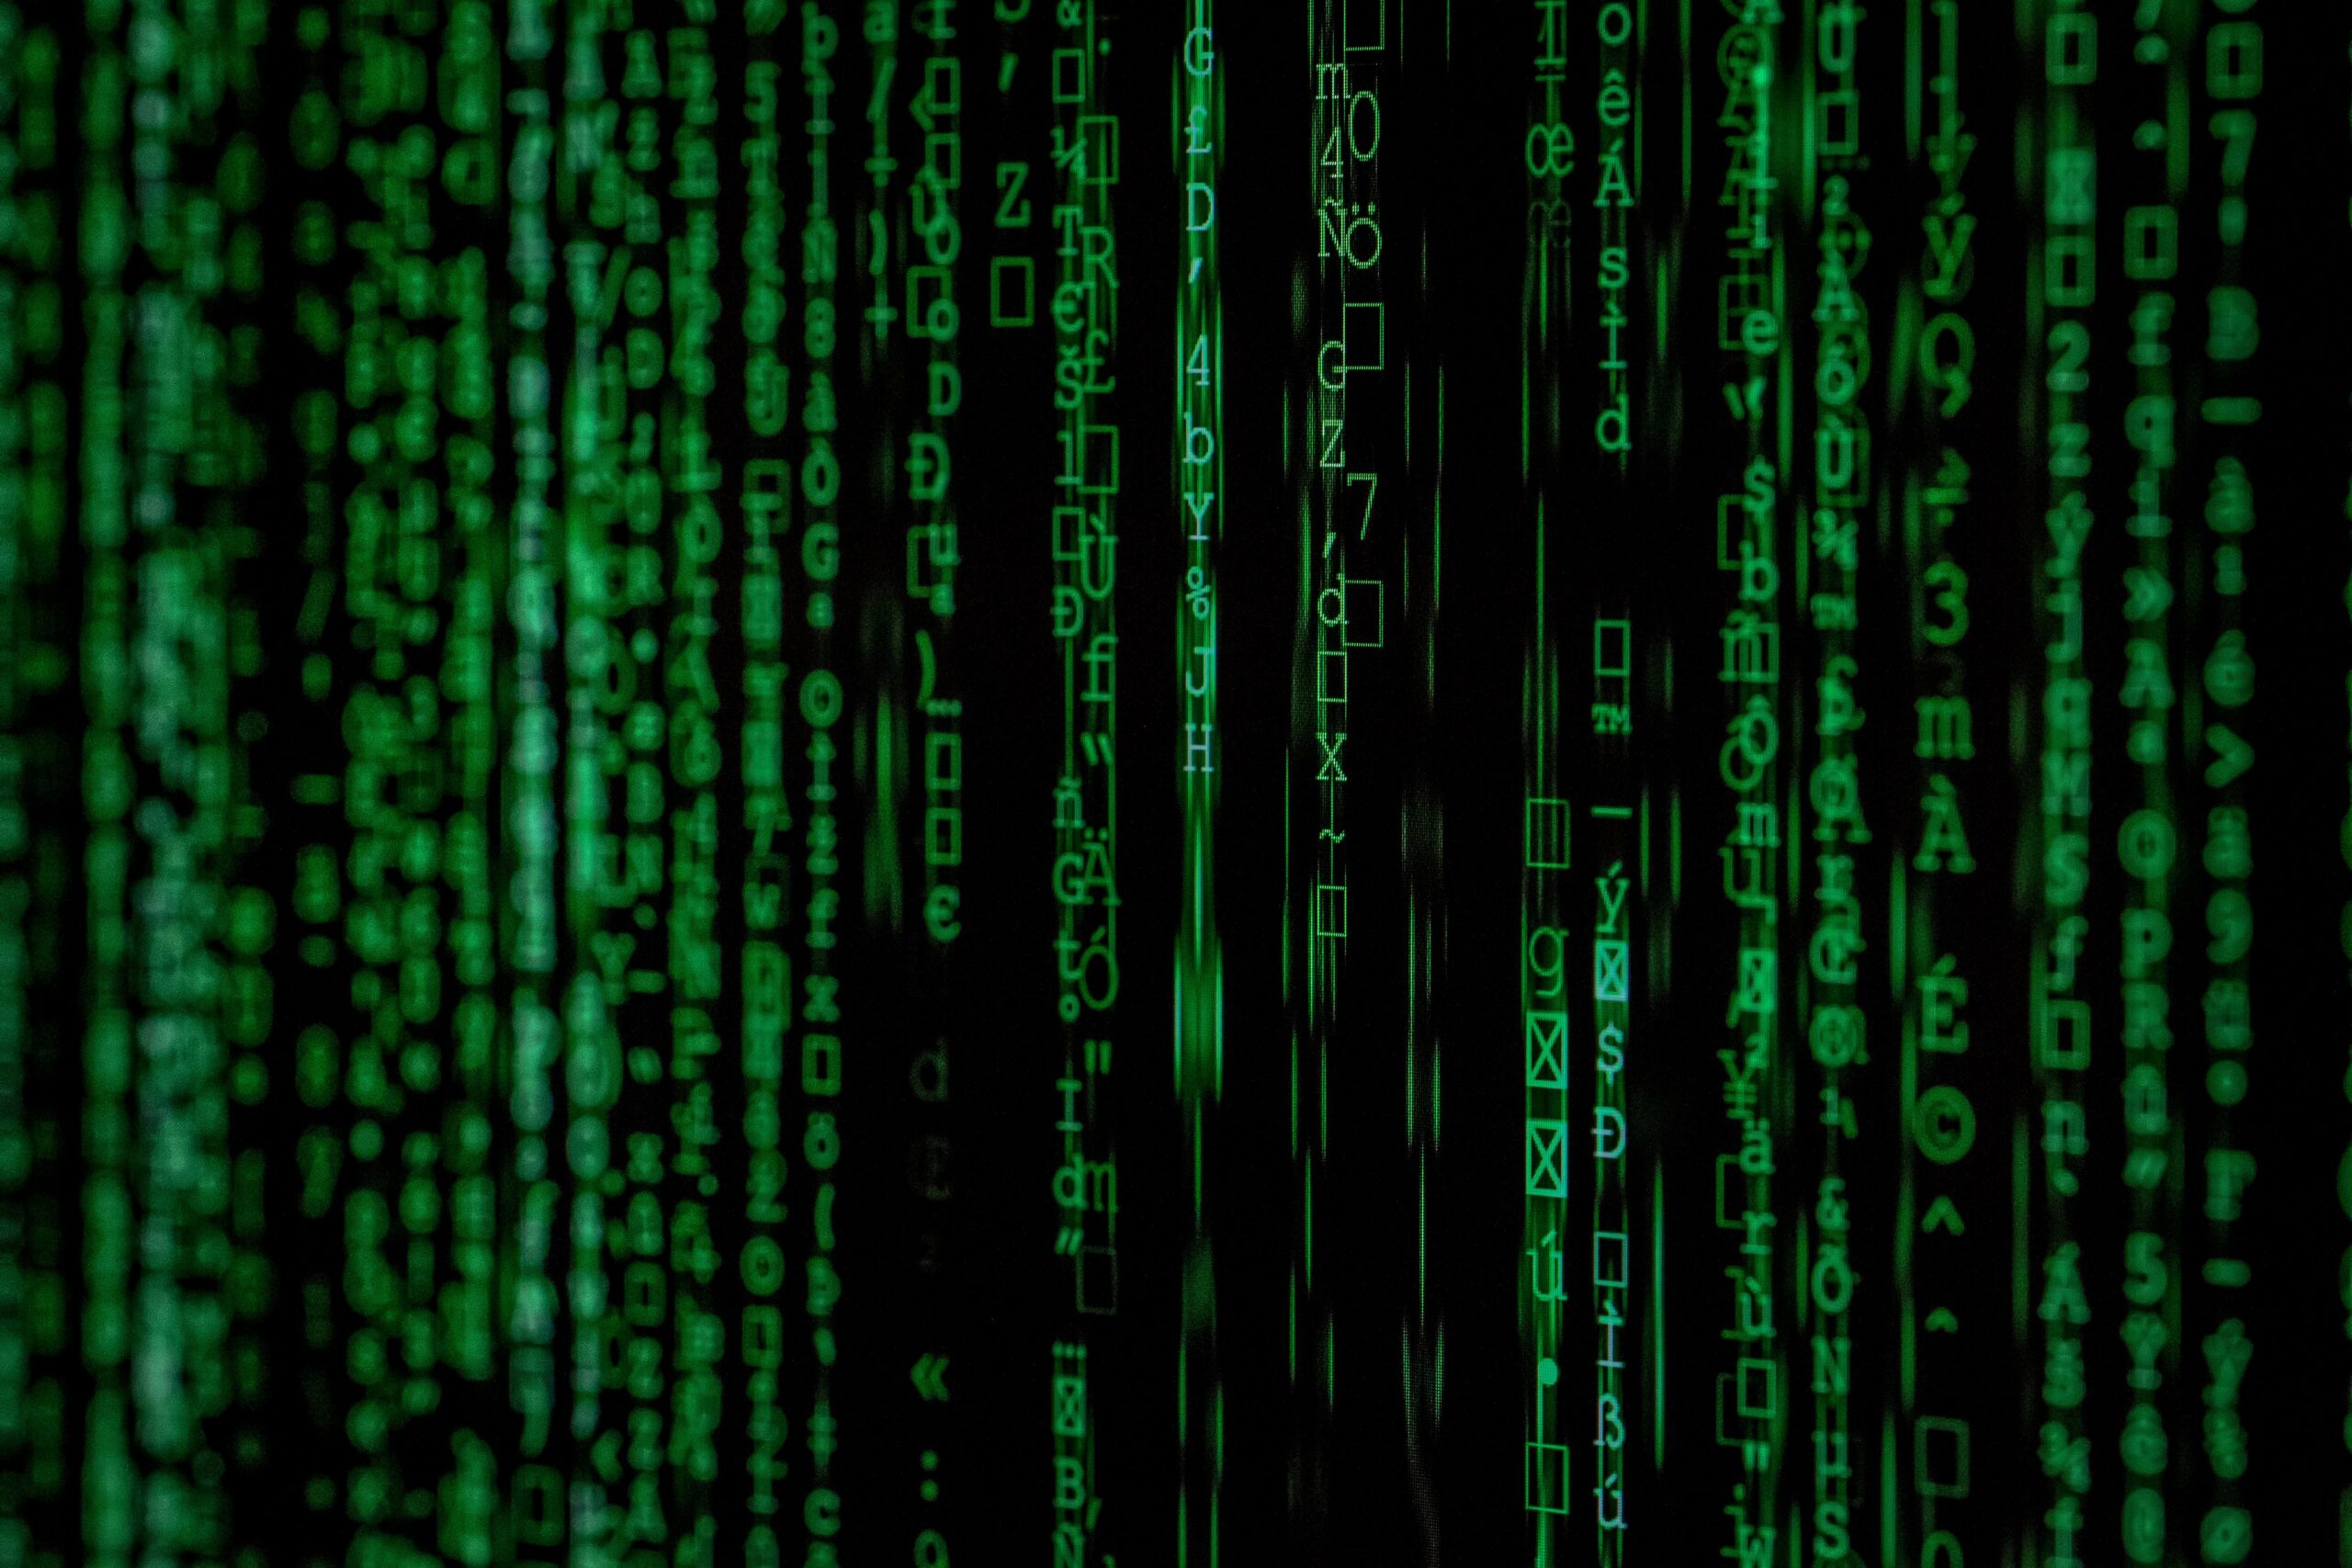 A close up of a green matrix code, representing encryption for cyber security.